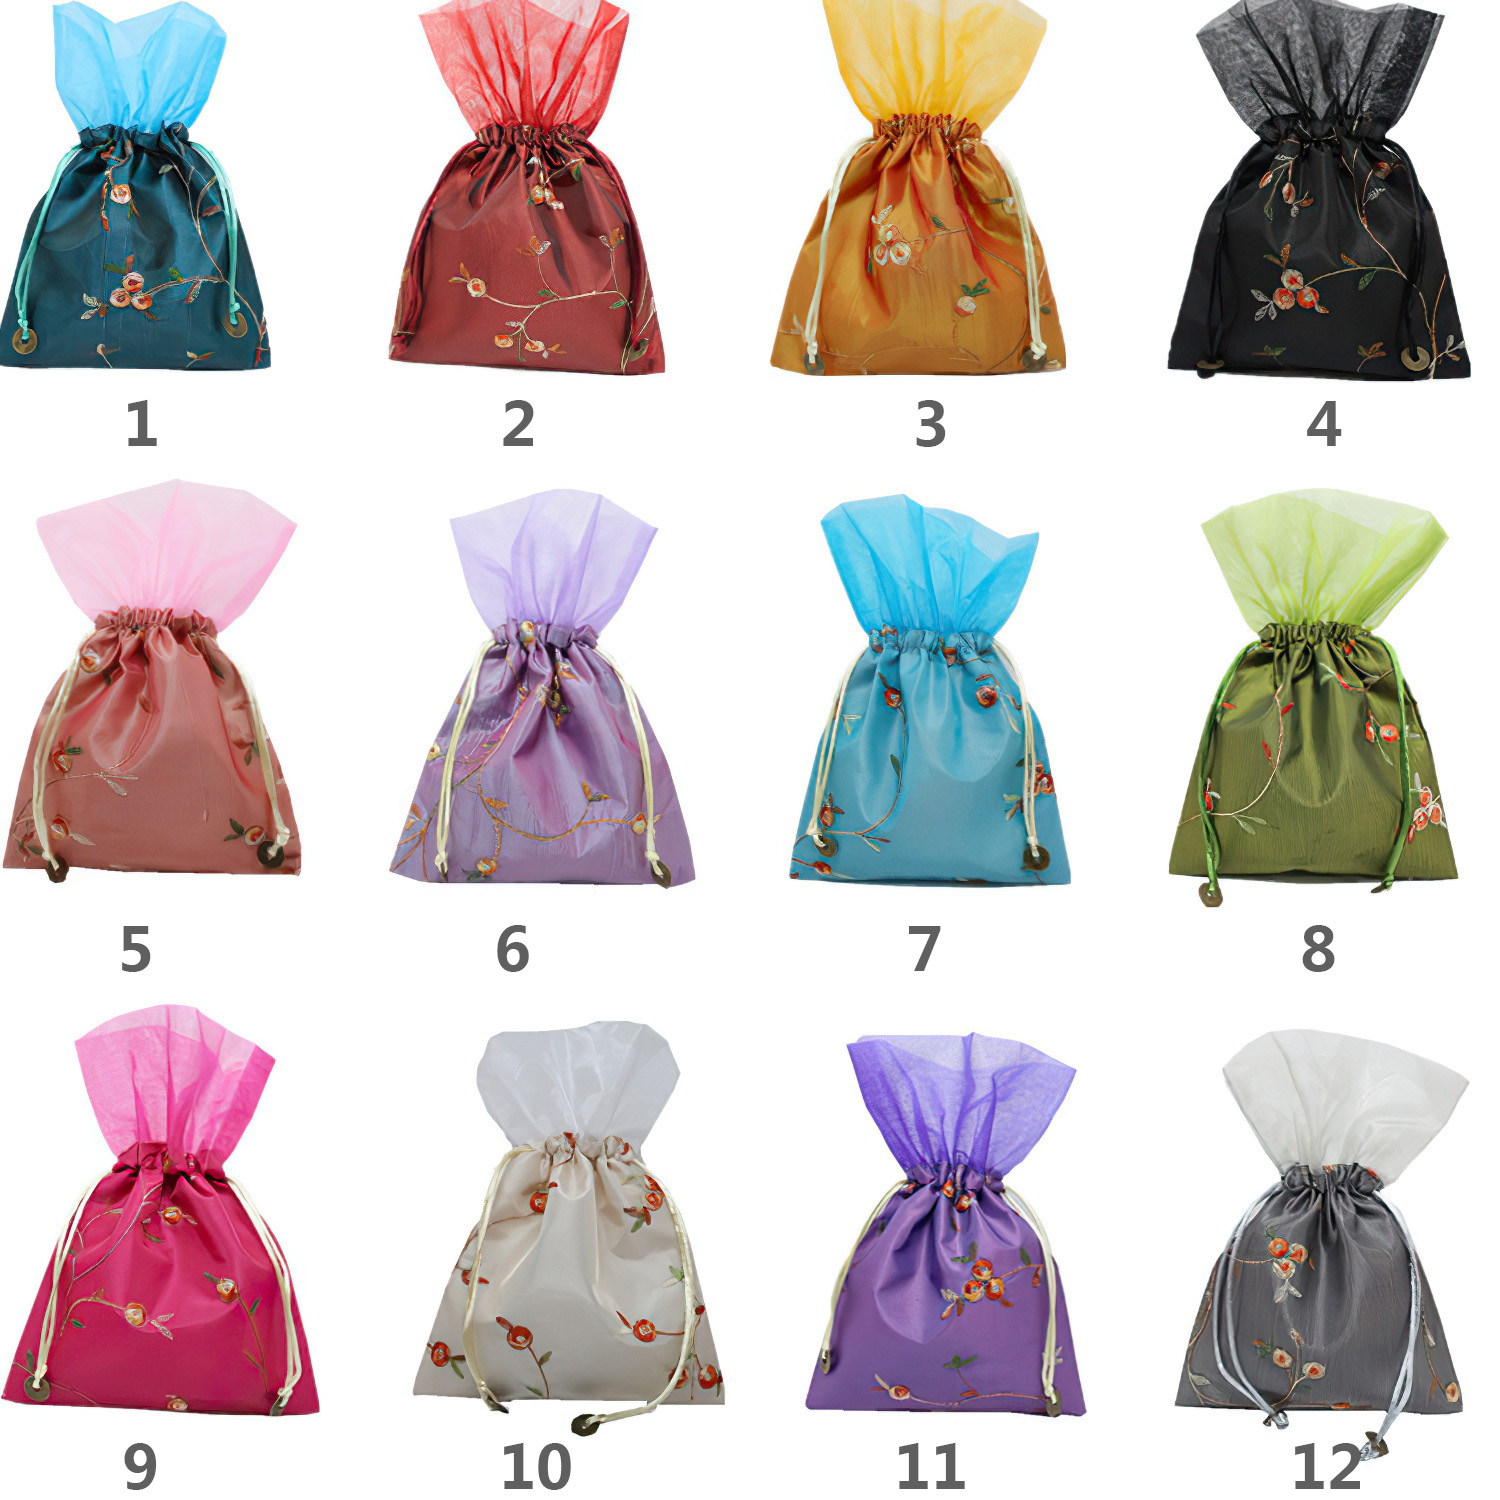 Silk Brocade Pouch with Organza Top Wholesale, Stocked Sizes and Colors